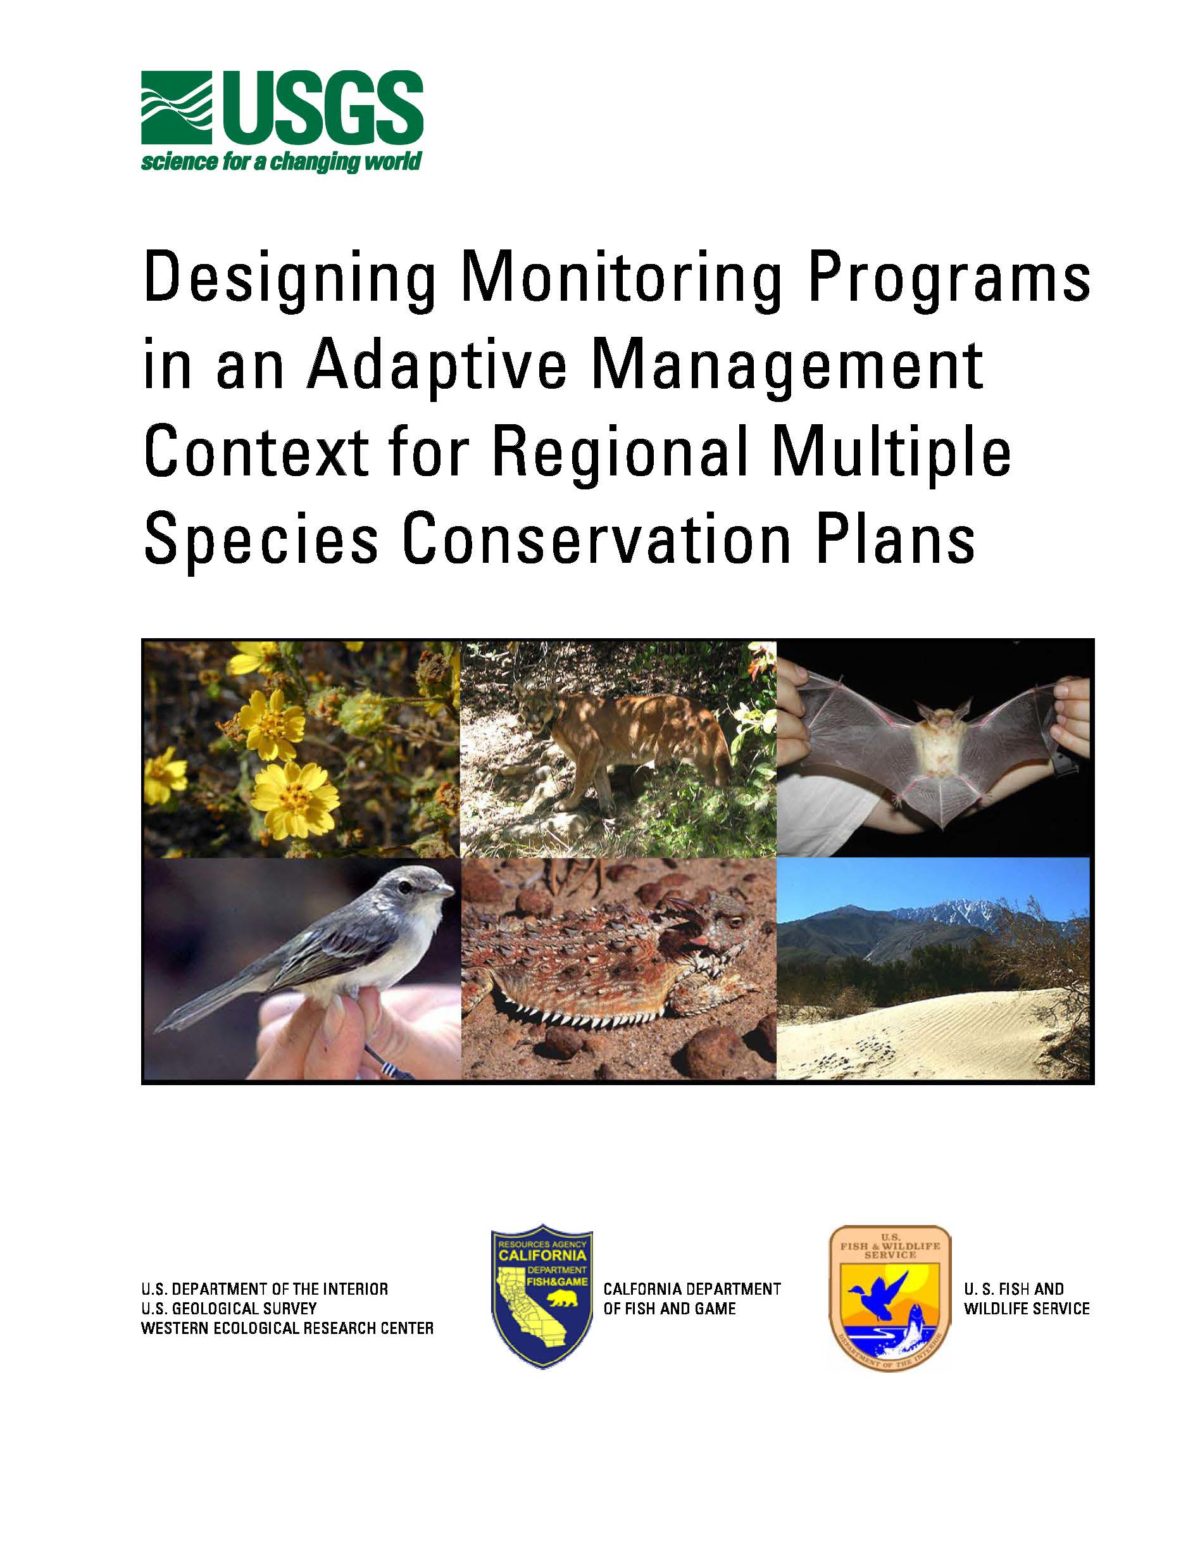 Designing Monitoring Programs in an Adaptive Management Context for Regional Multiple Species Conservation Plans